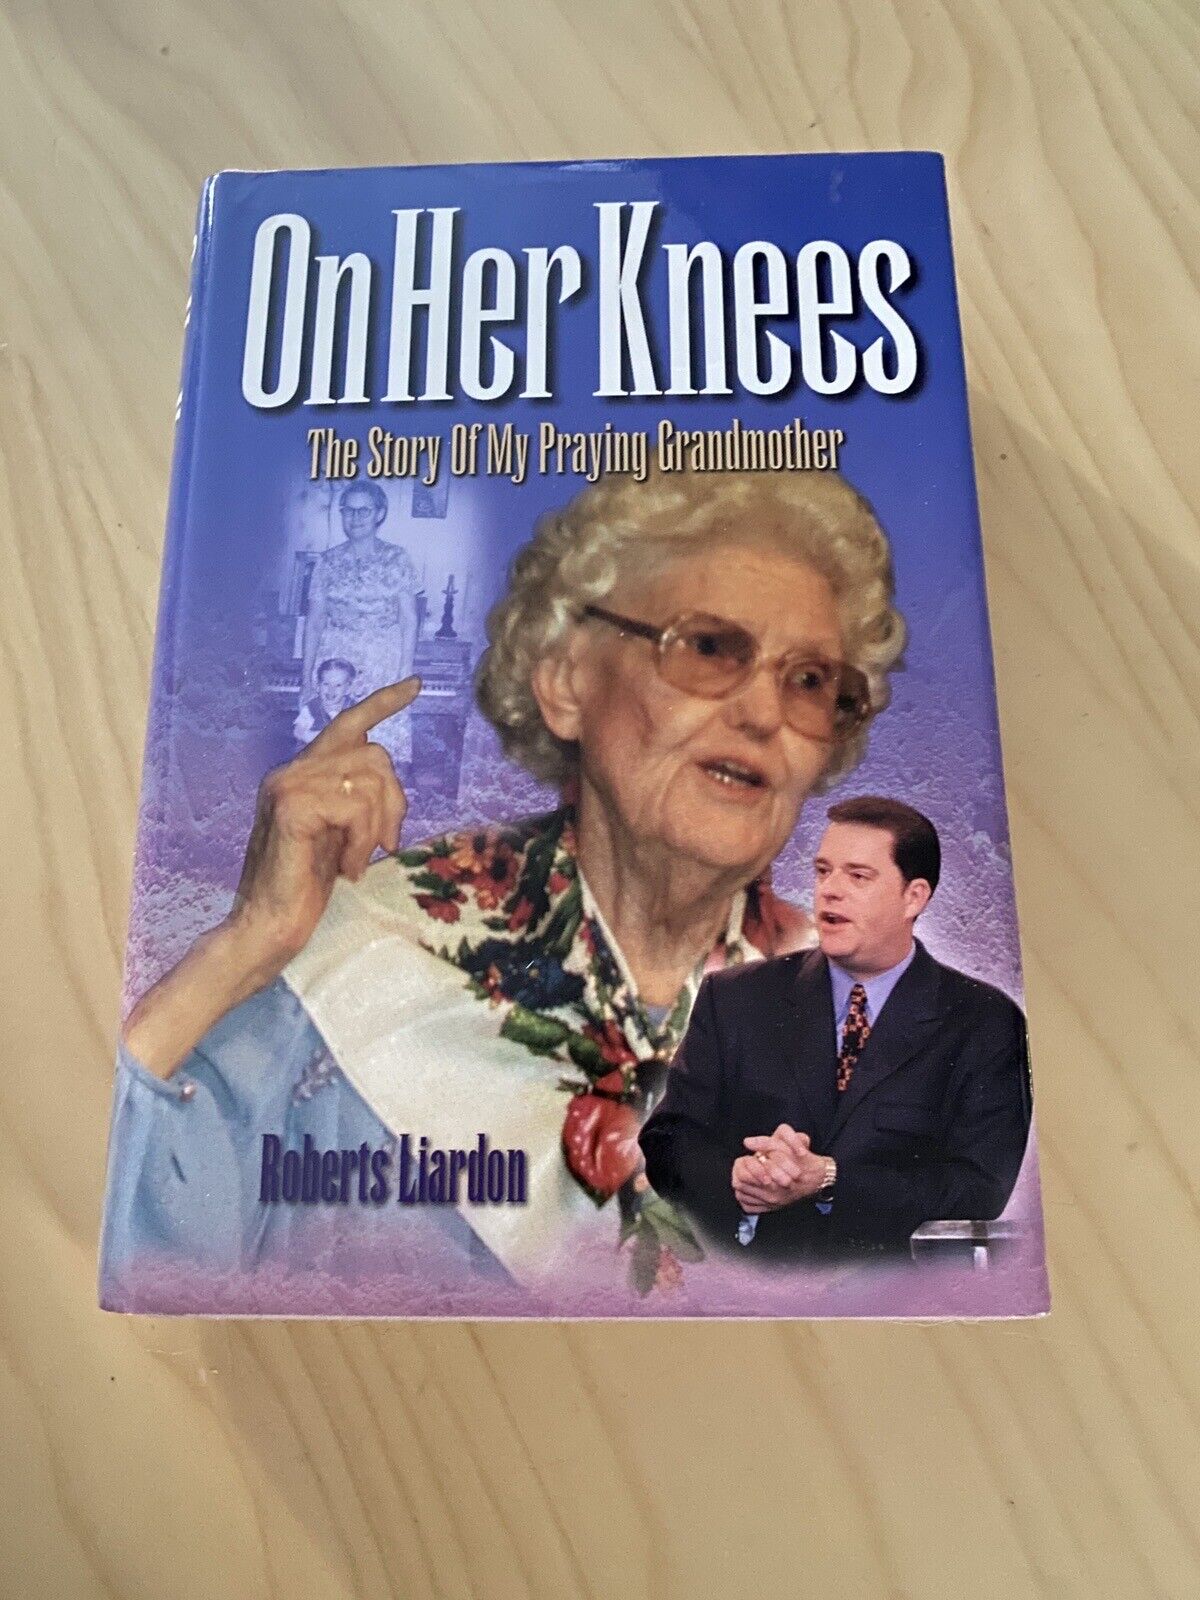 anders westin recommends My Wife On Her Knees